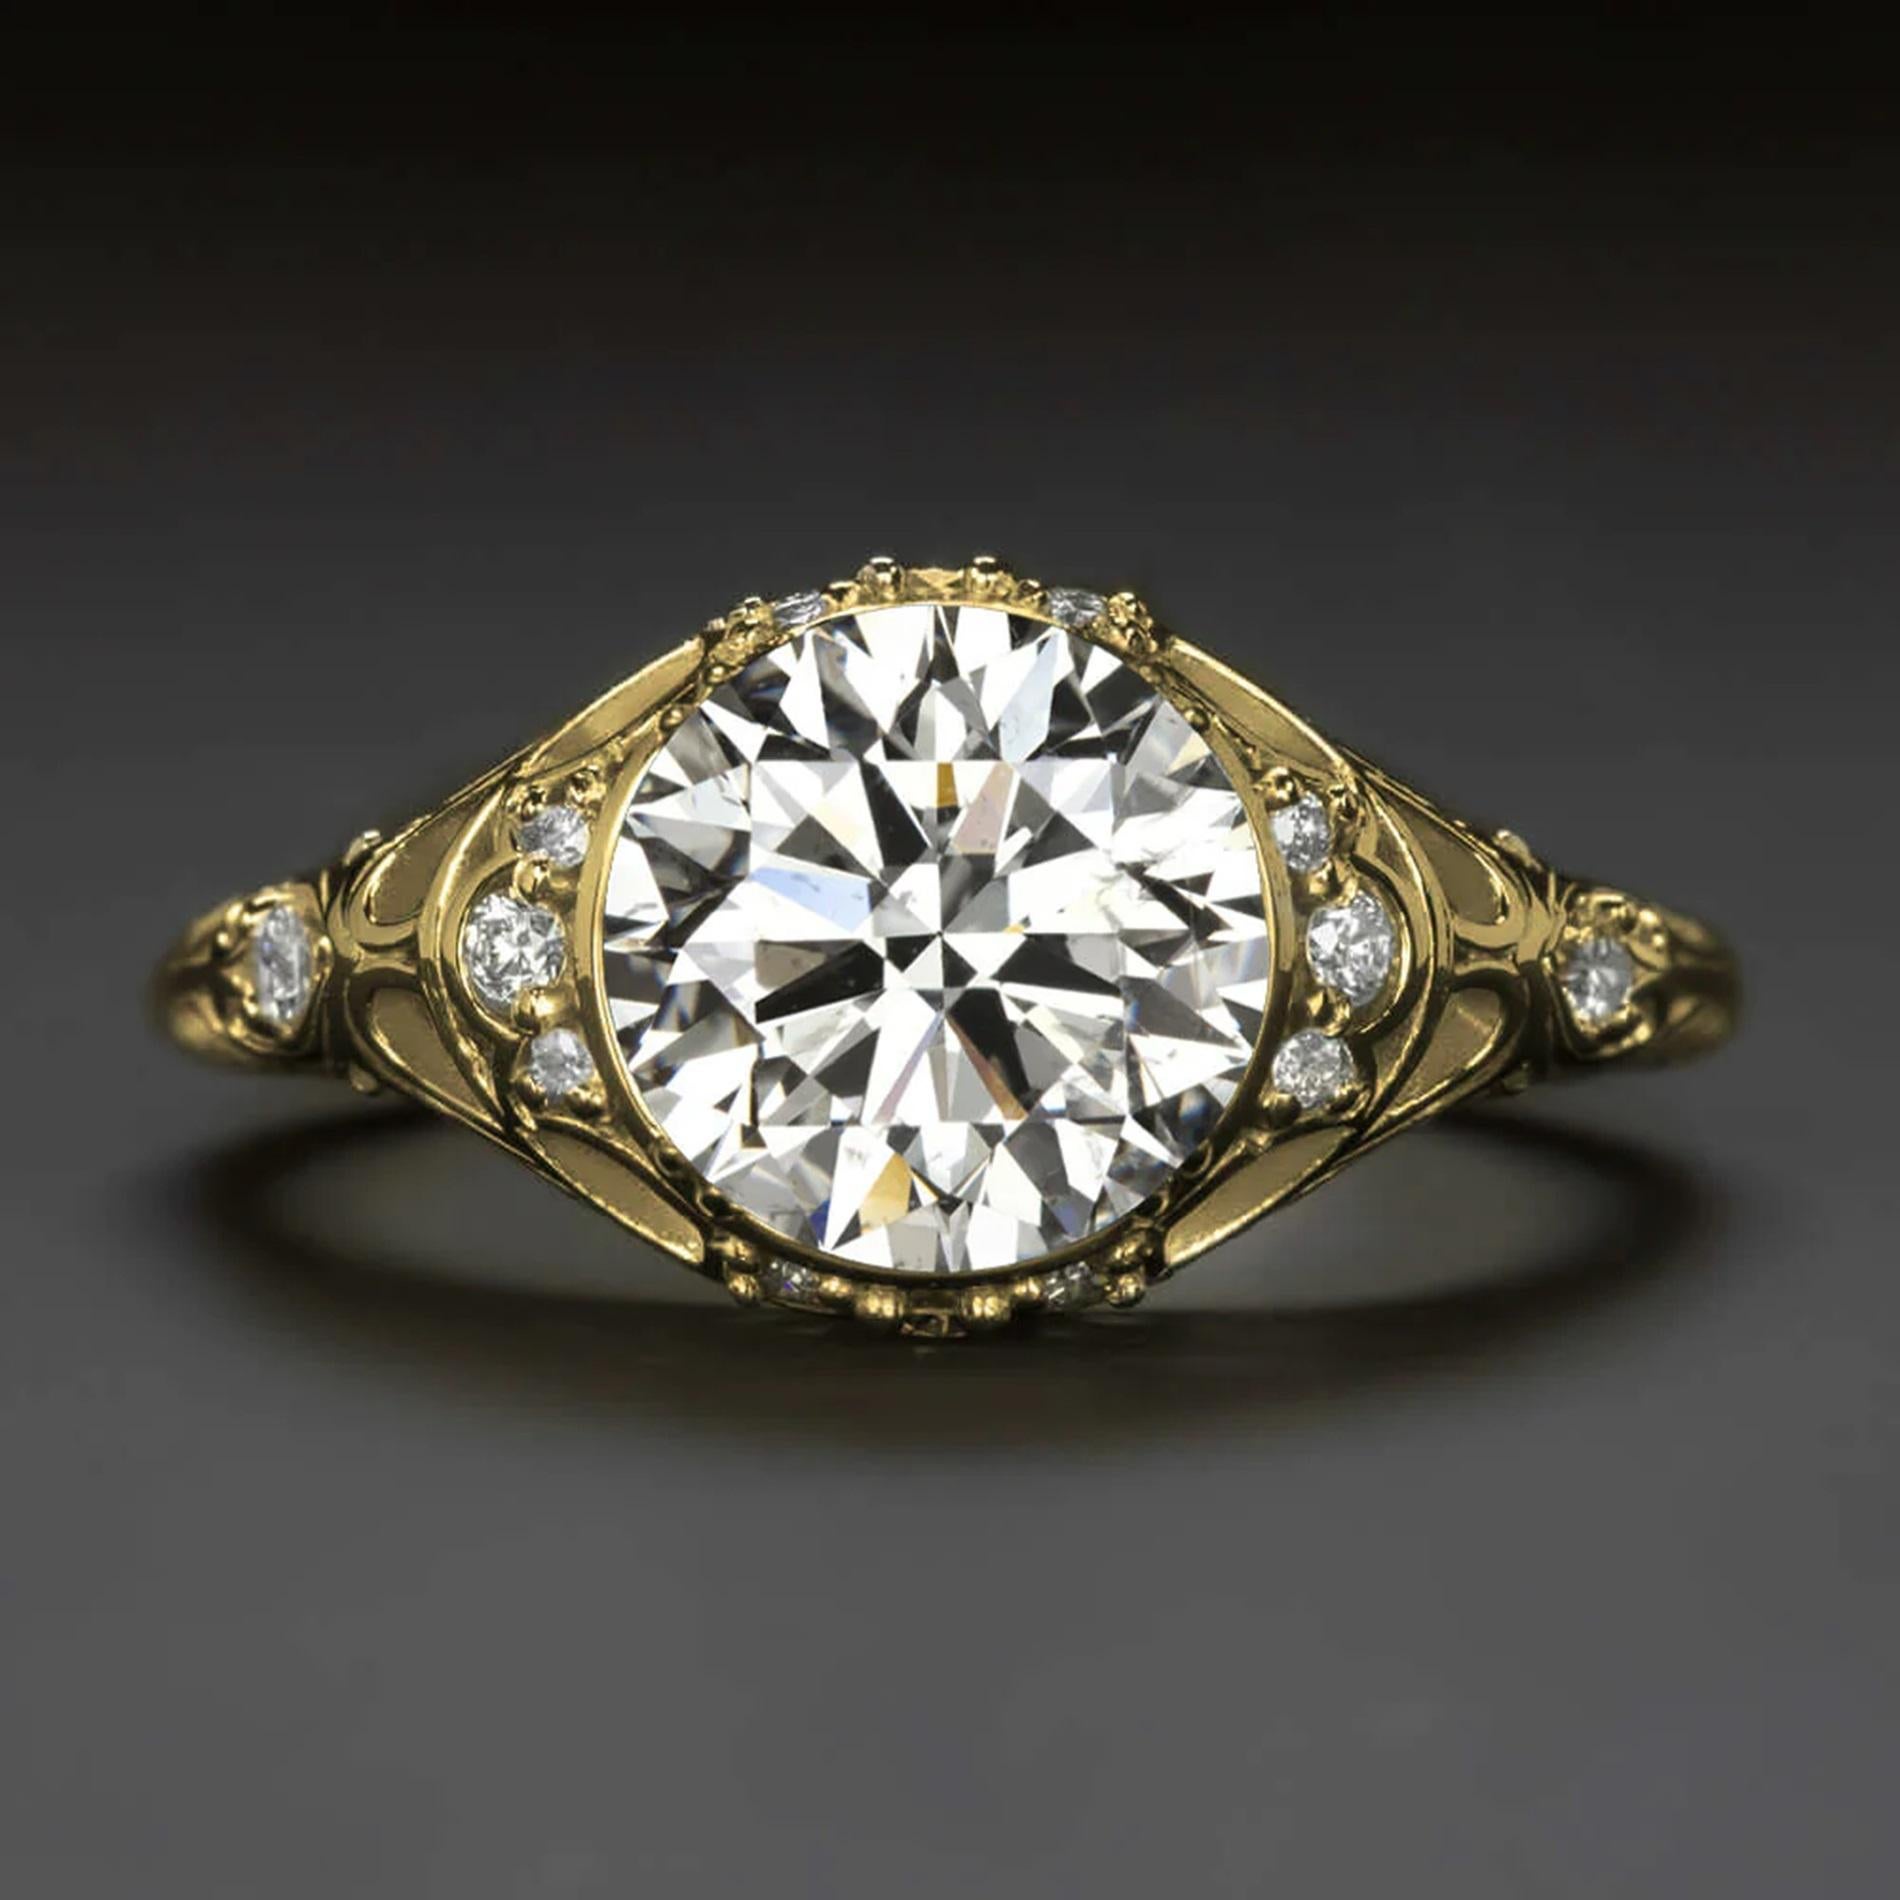 This vintage-style diamond ring commands attention with its impressive size and a beautifully detailed filigree setting adorned with diamonds. The generous 2-carat round brilliant cut center diamond captivates with its eye-catching size and dazzling